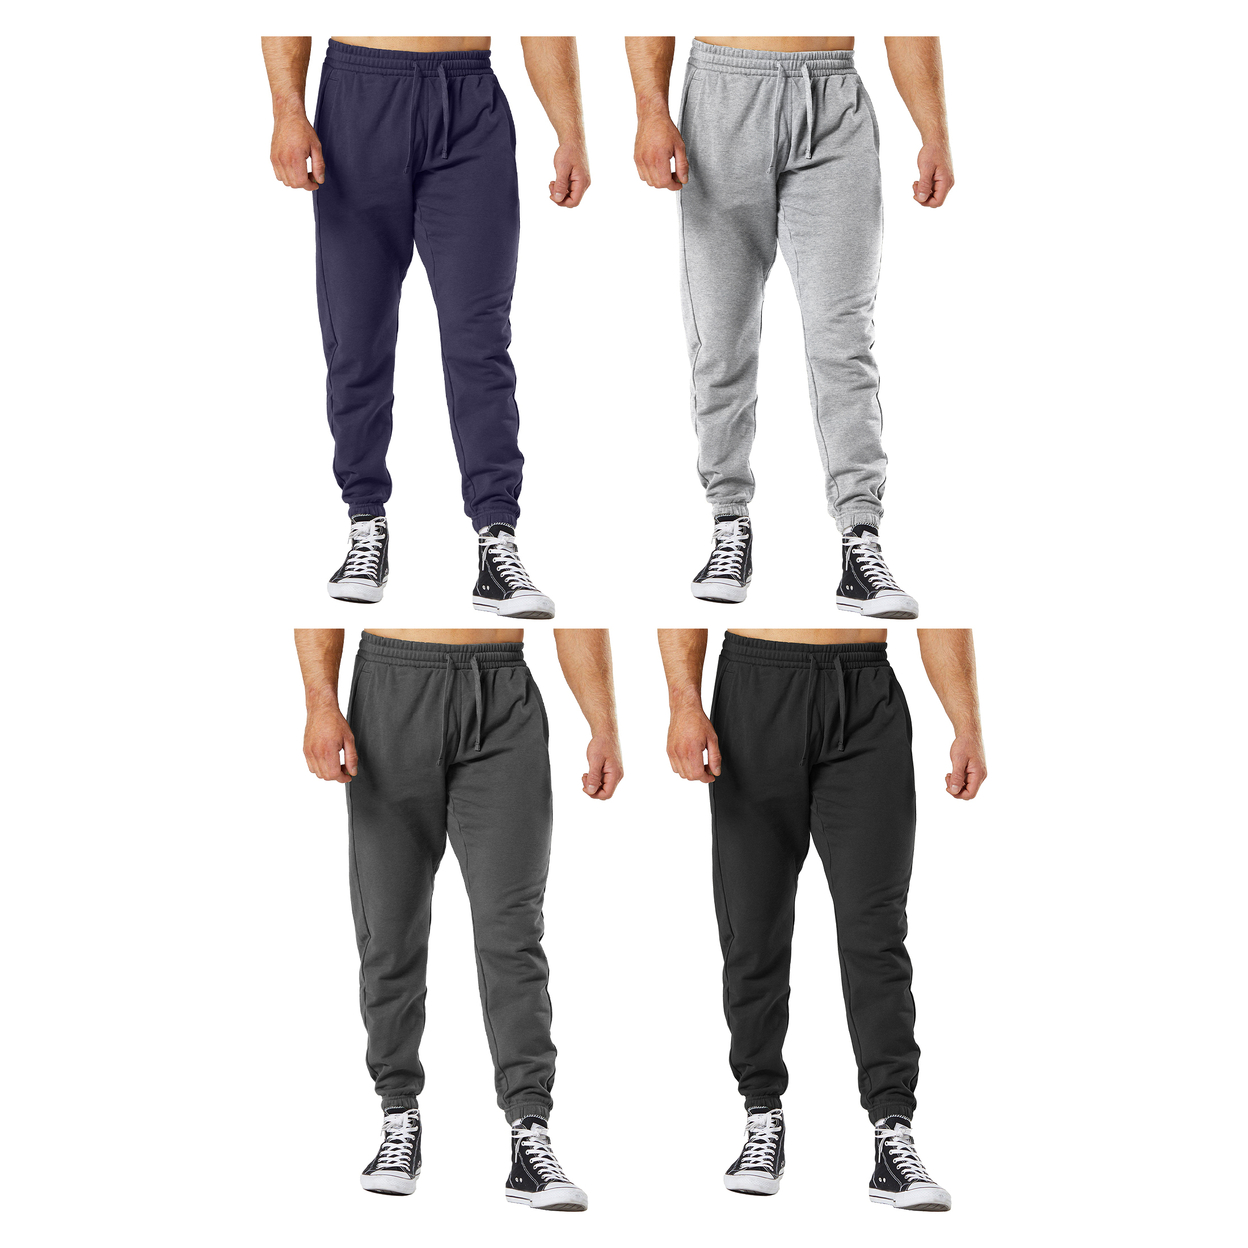 2-Pack: Men's Ultra-Soft Cozy Winter Warm Casual Fleece-Lined Sweatpants Jogger - Black & Charcoal, Large